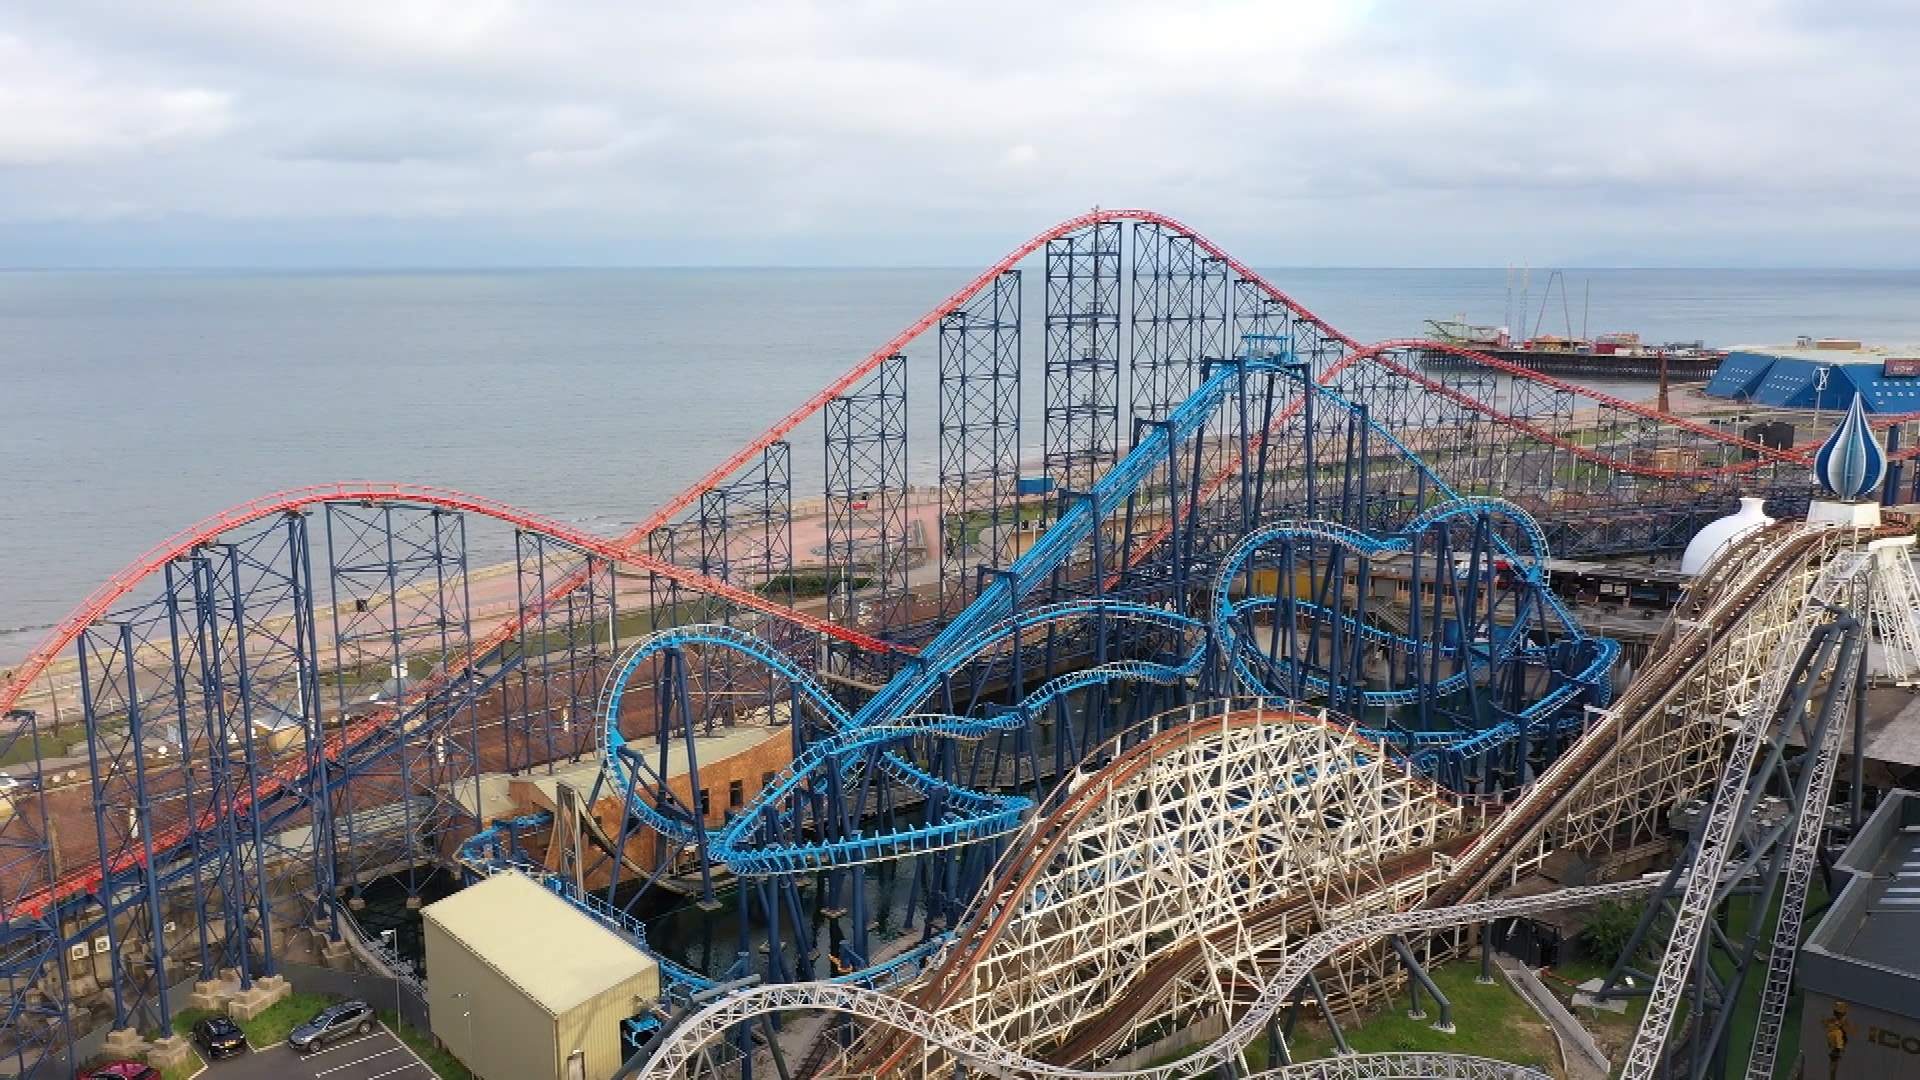 Riders Get Stuck At 235 Feet After Rollercoaster Malfunction